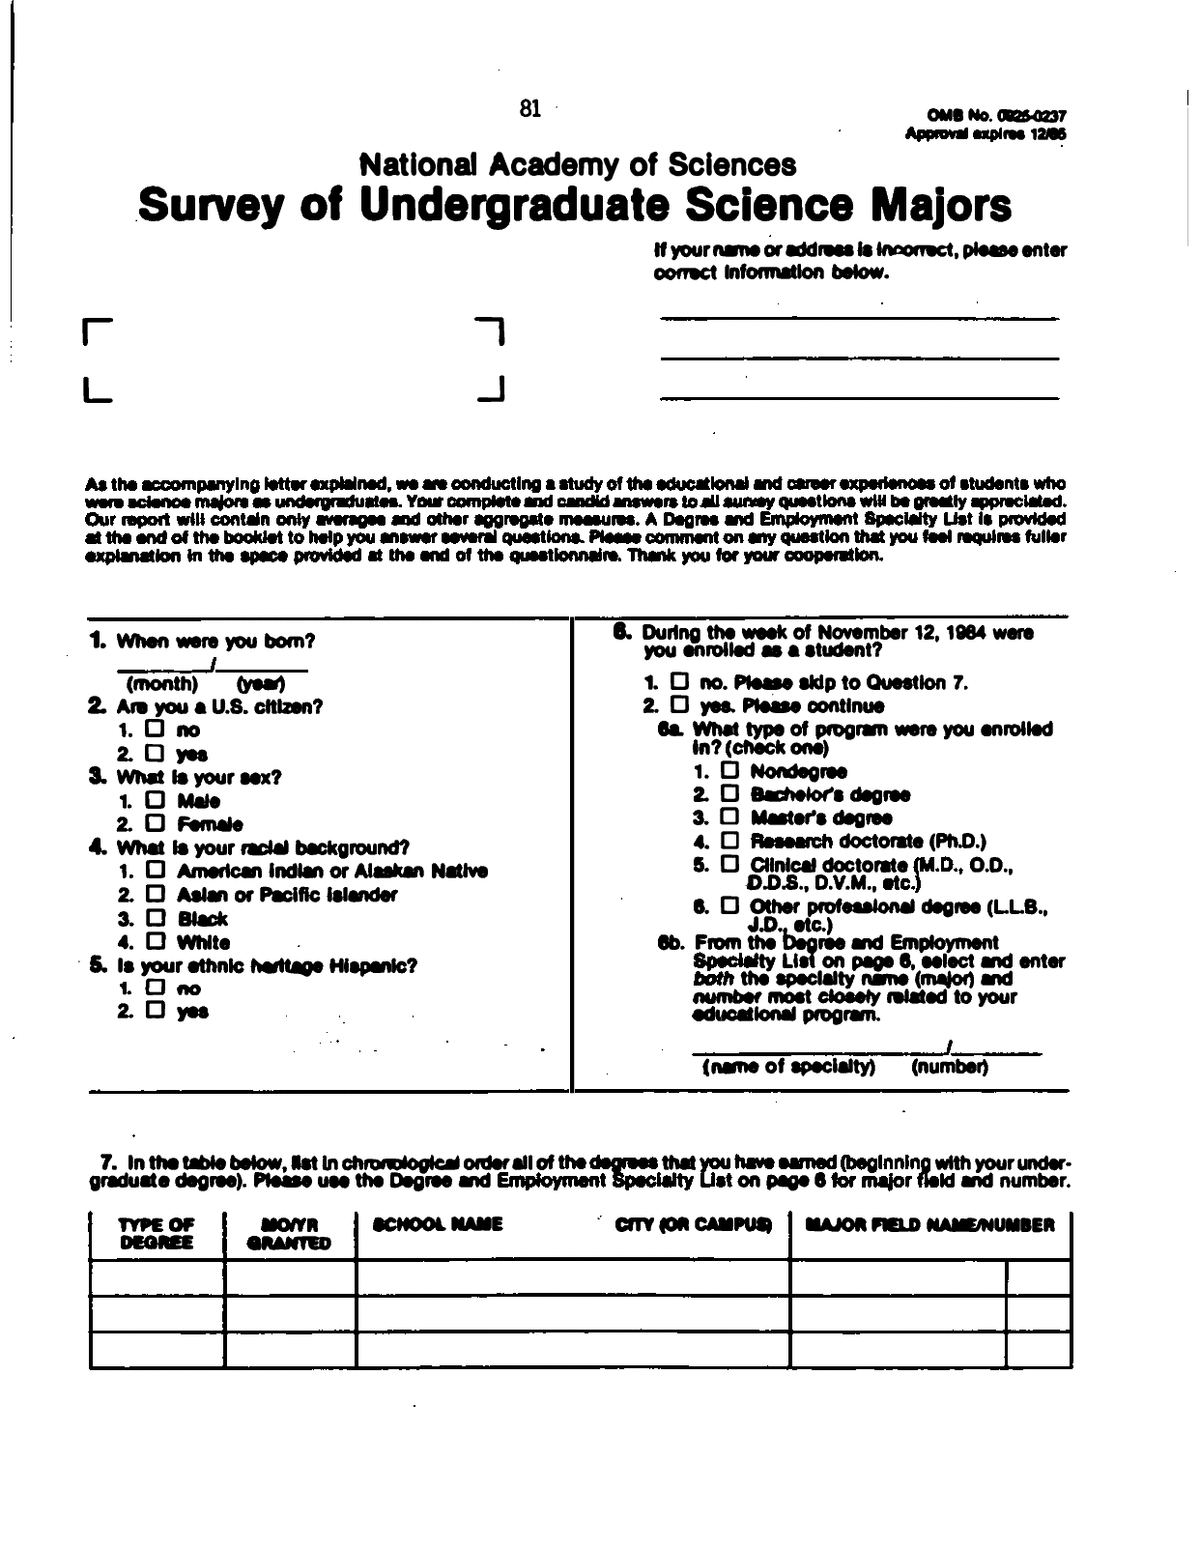 Cover letter for survey research